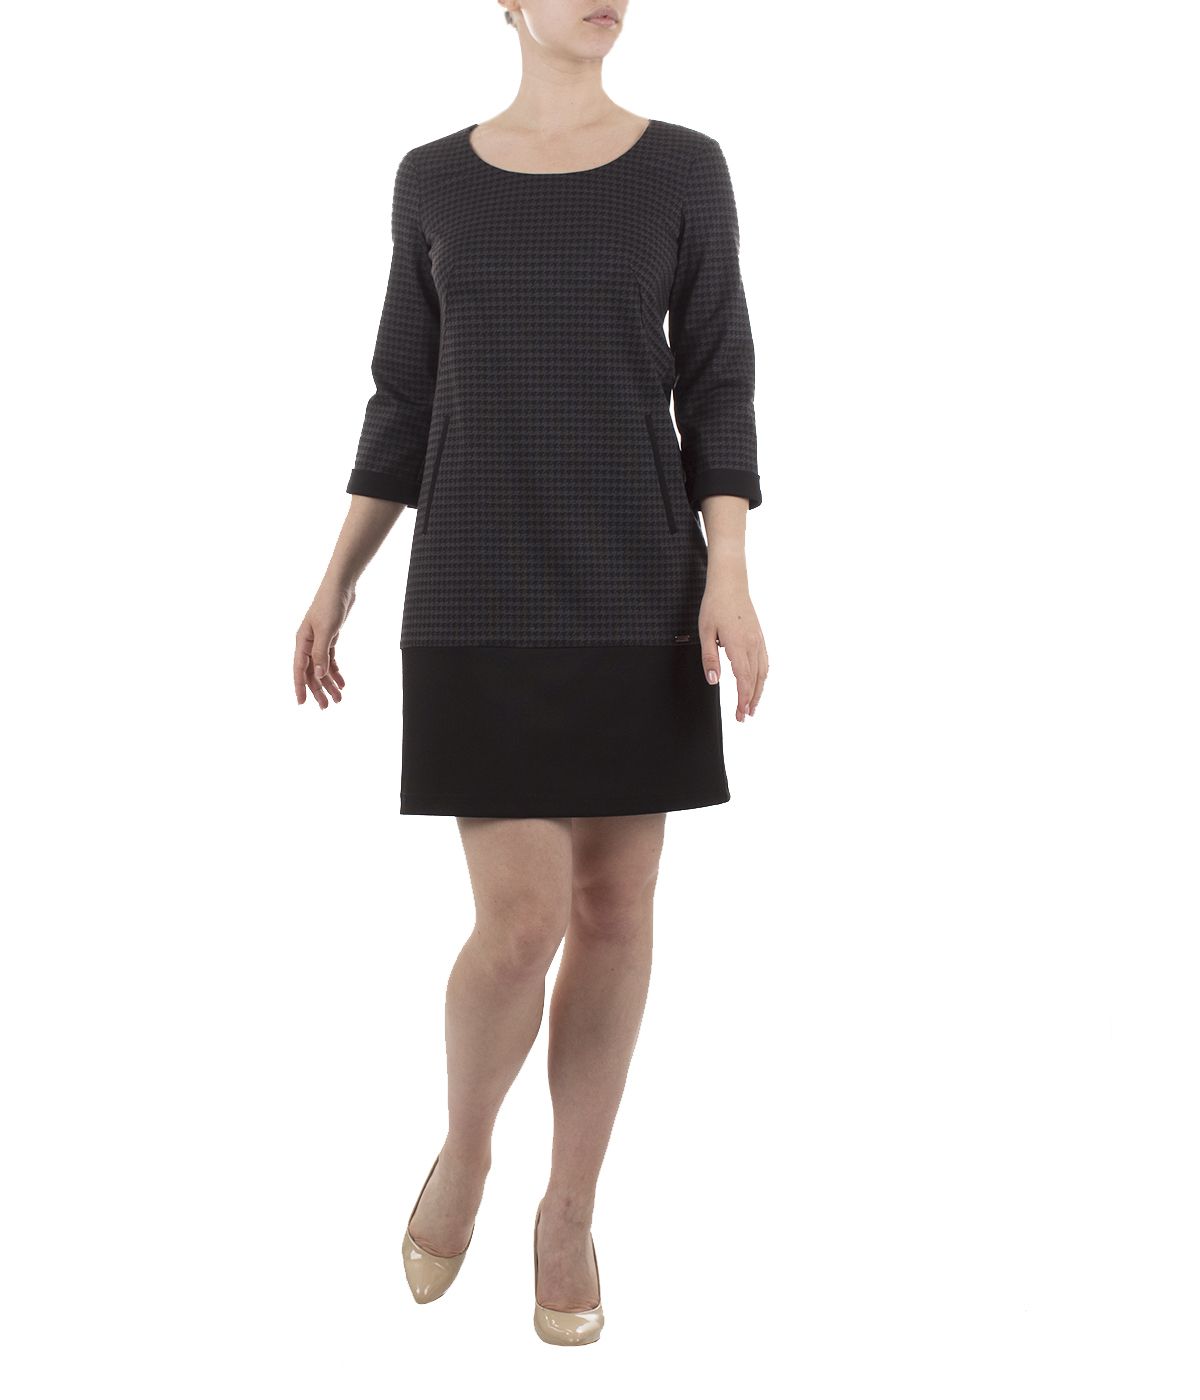 Straight houndstooth dress with round neck, ¾ sleeves and contrasting band  3